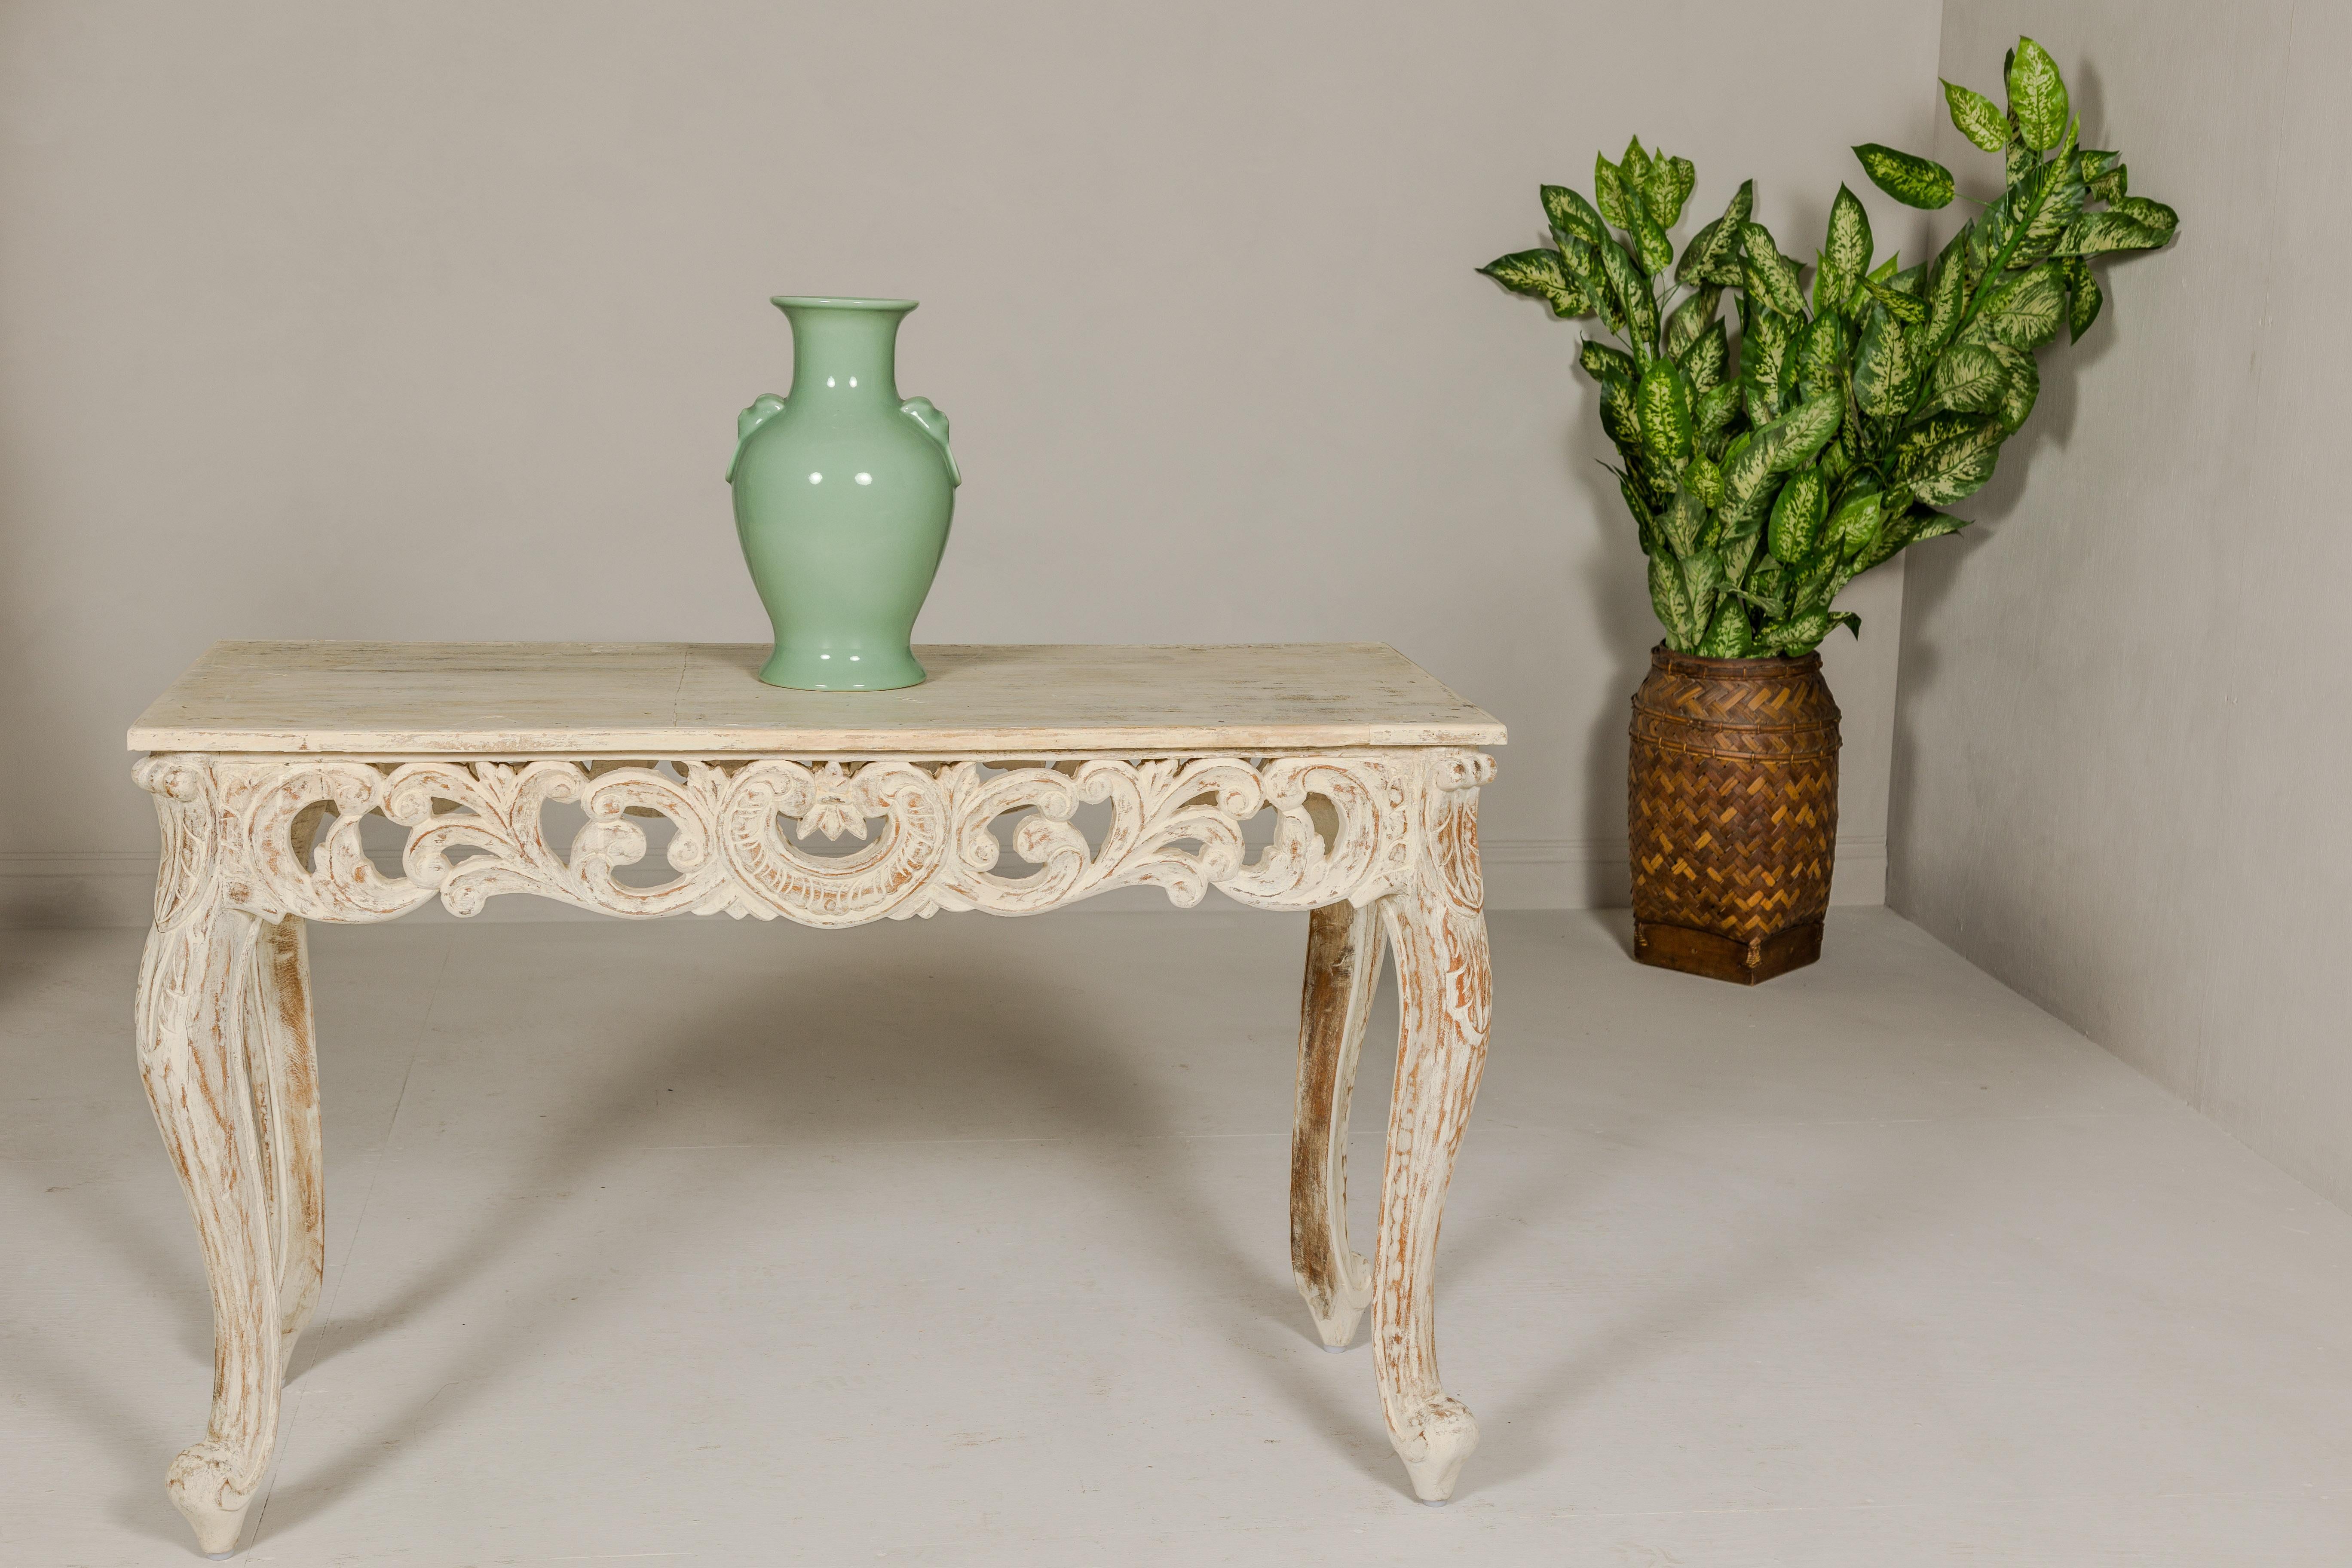 A Rococo style console table with distressed painted finish, carved apron, cabriole legs and scrolling feet. We have two available. Introduce a touch of timeless elegance to your home with this exquisite Rococo style console table, featuring a